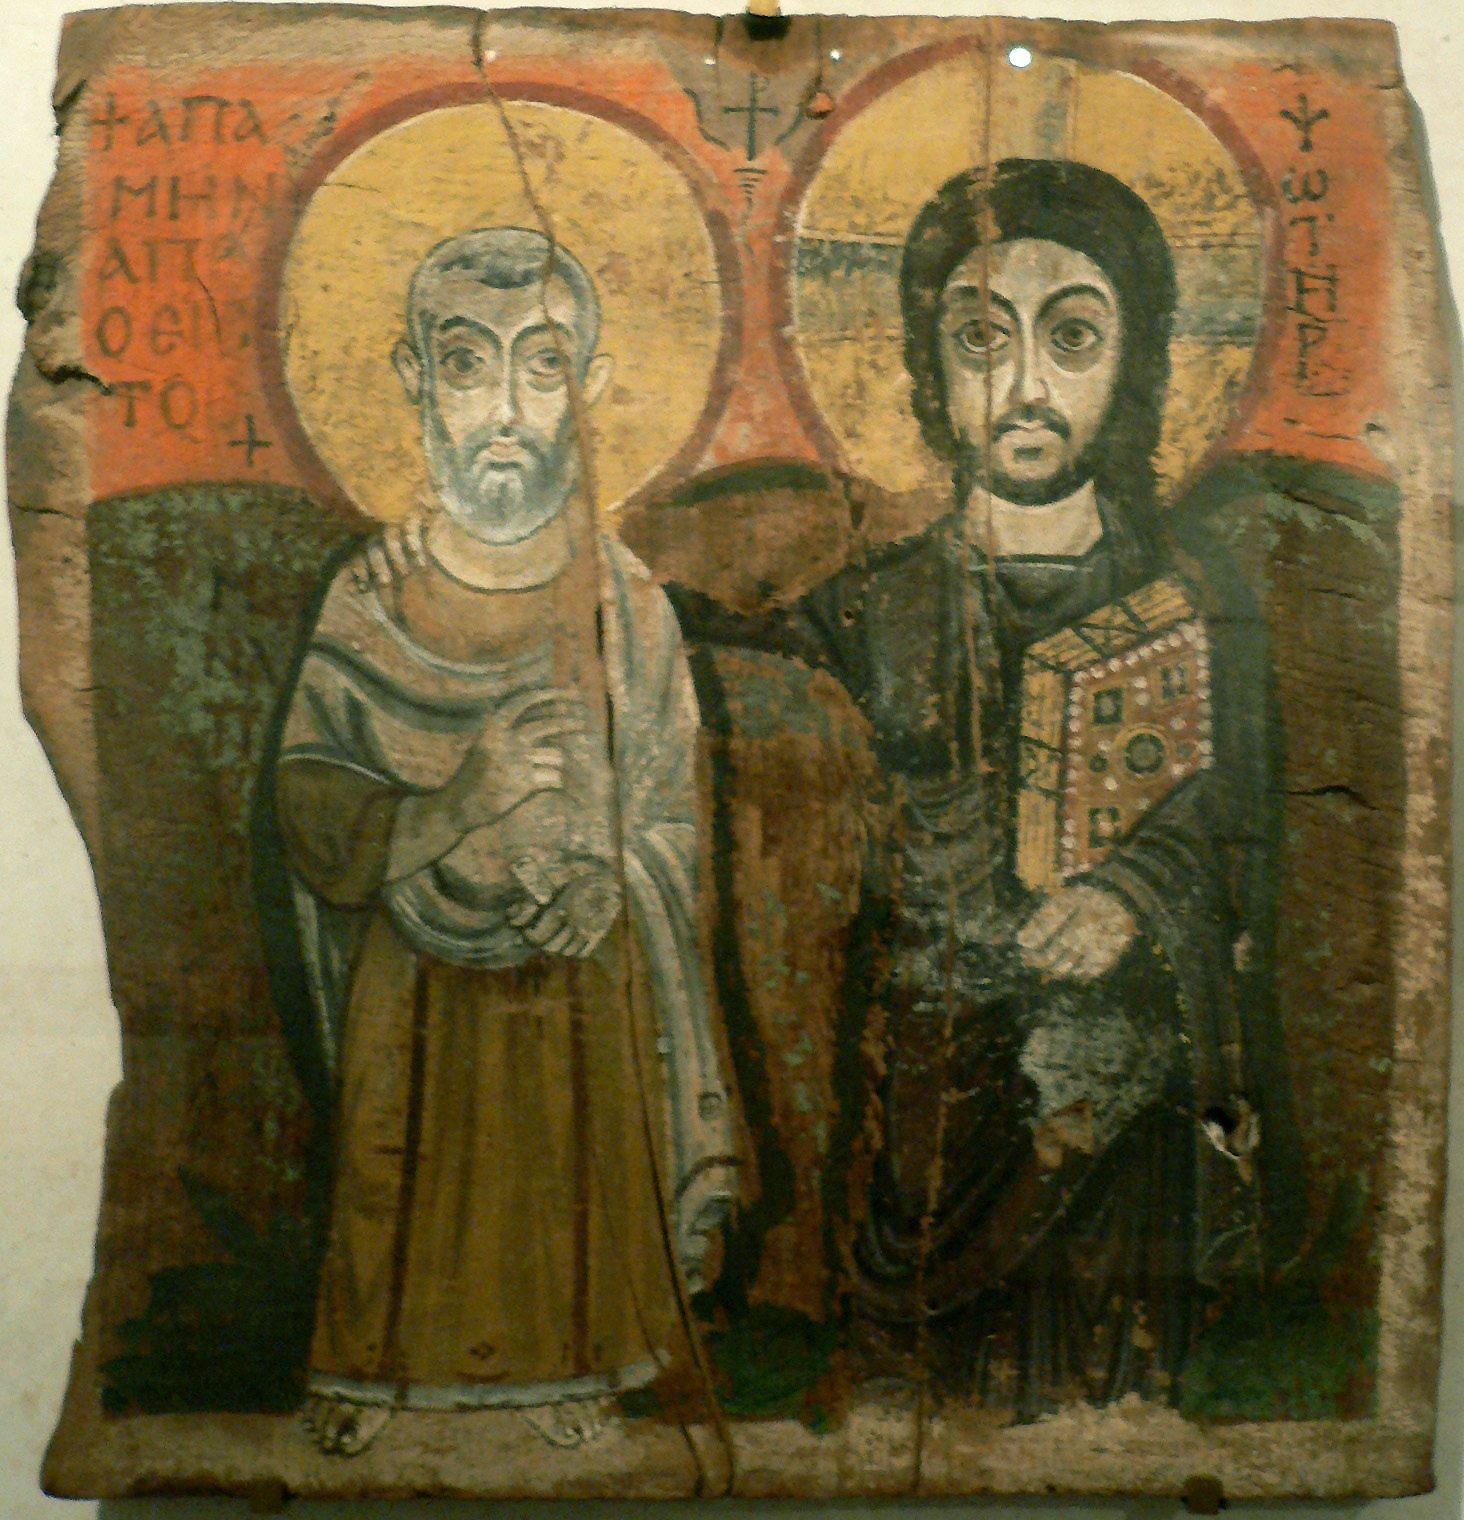 This early medieval painting of Jesus and the abbot of a monastery dates from the 6th or 7th century. The artist of this beautiful piece is unknown. Note how the figures of Jesus and the abbot are stylized, almost like drawings from a cartoon strip. (Image via Wikipedia)